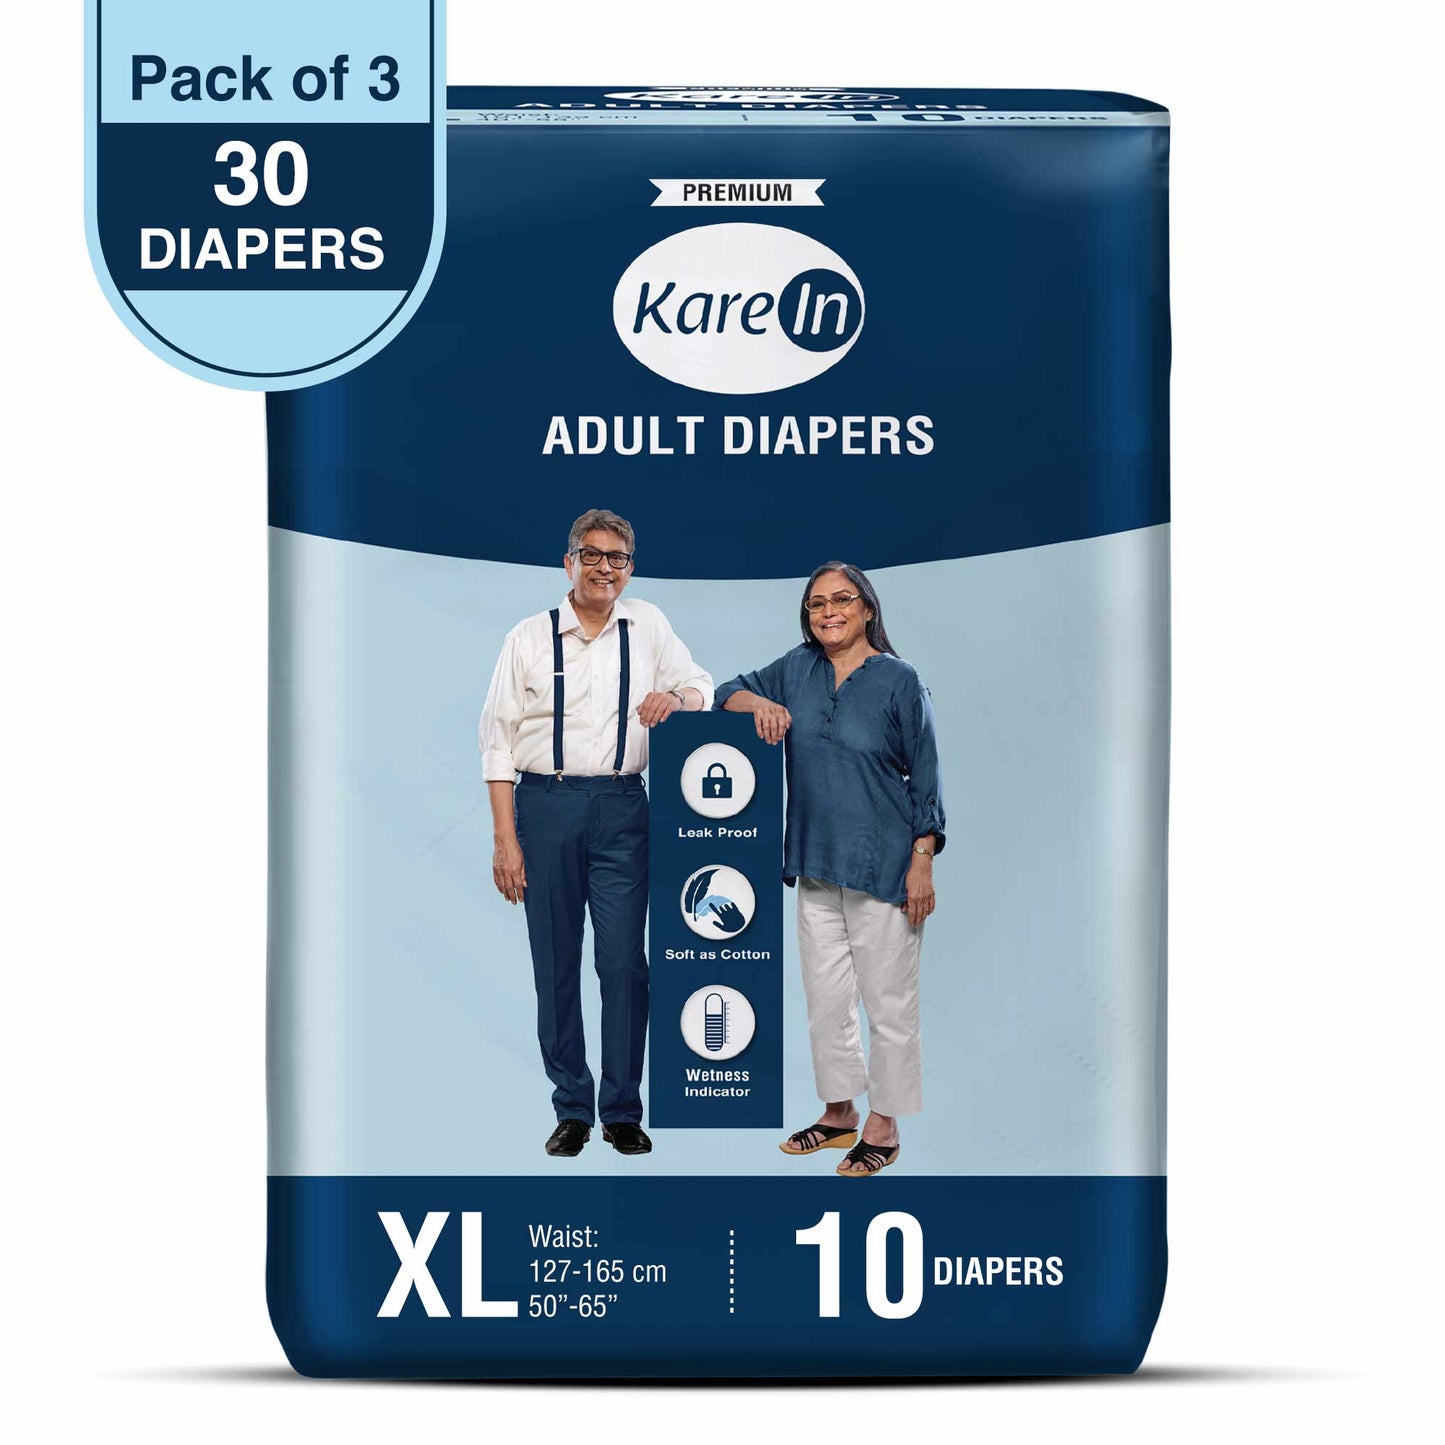 KareIn Premium Adult Diapers, Extra Large, Waist Size127-165 Cm (50"-65"), Tape Style, Unisex, High Absorbency, Leak Proof, Wetness Indicator, Pack of 3, 30 diapers